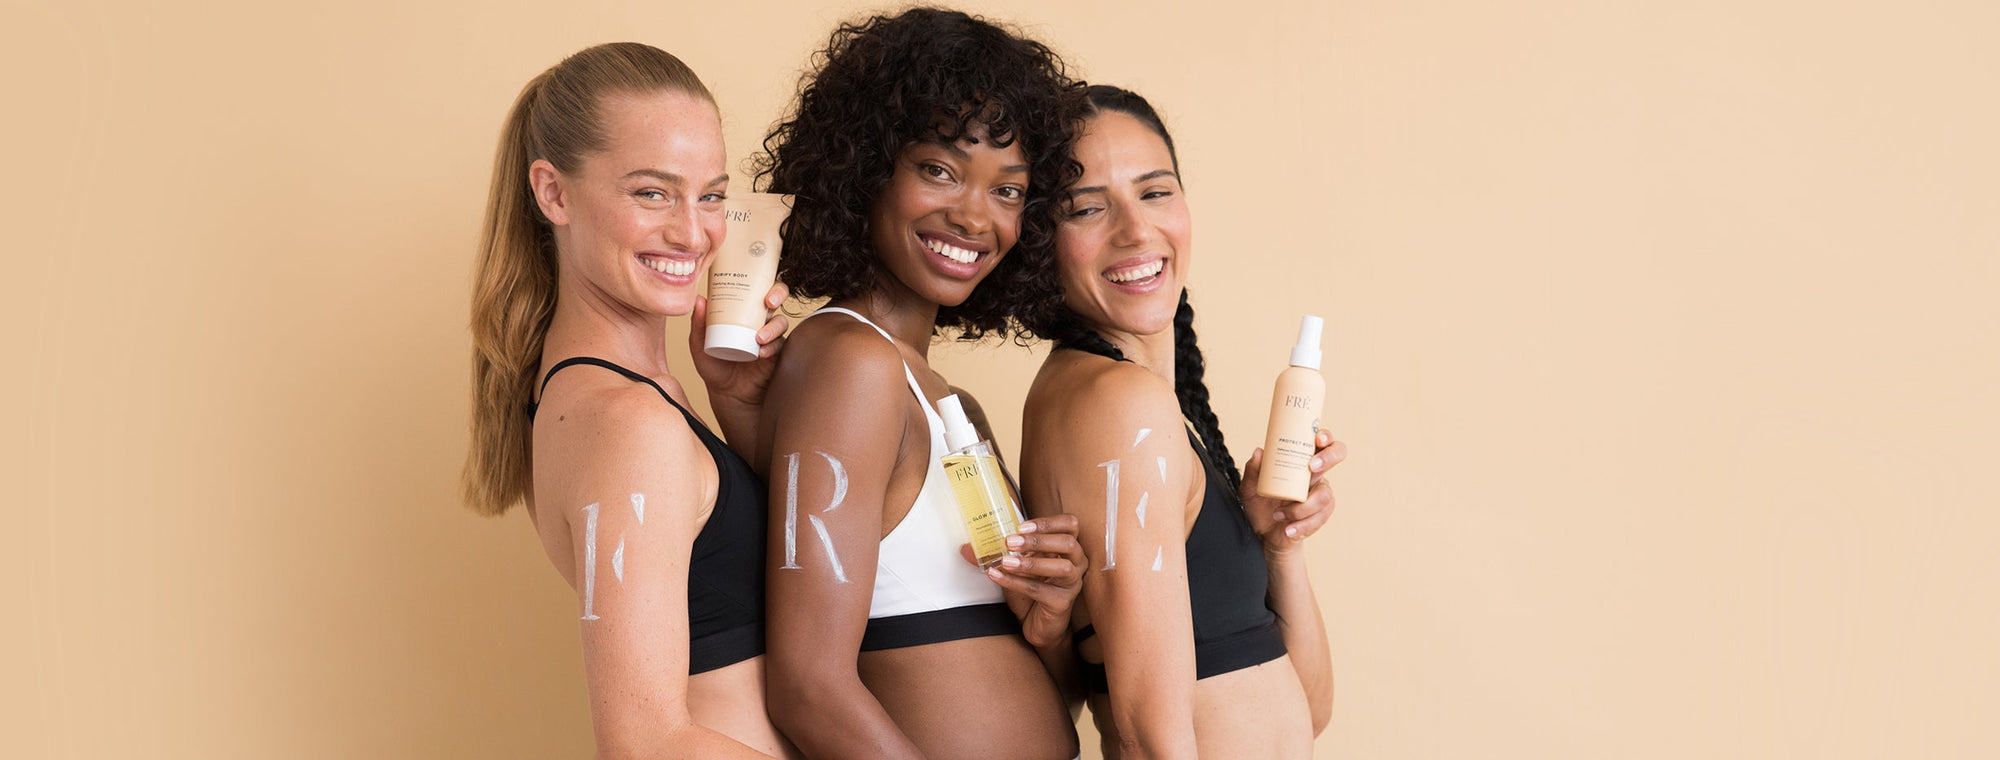 MEET FRÉ BODY: The first full-body solution for women who work out